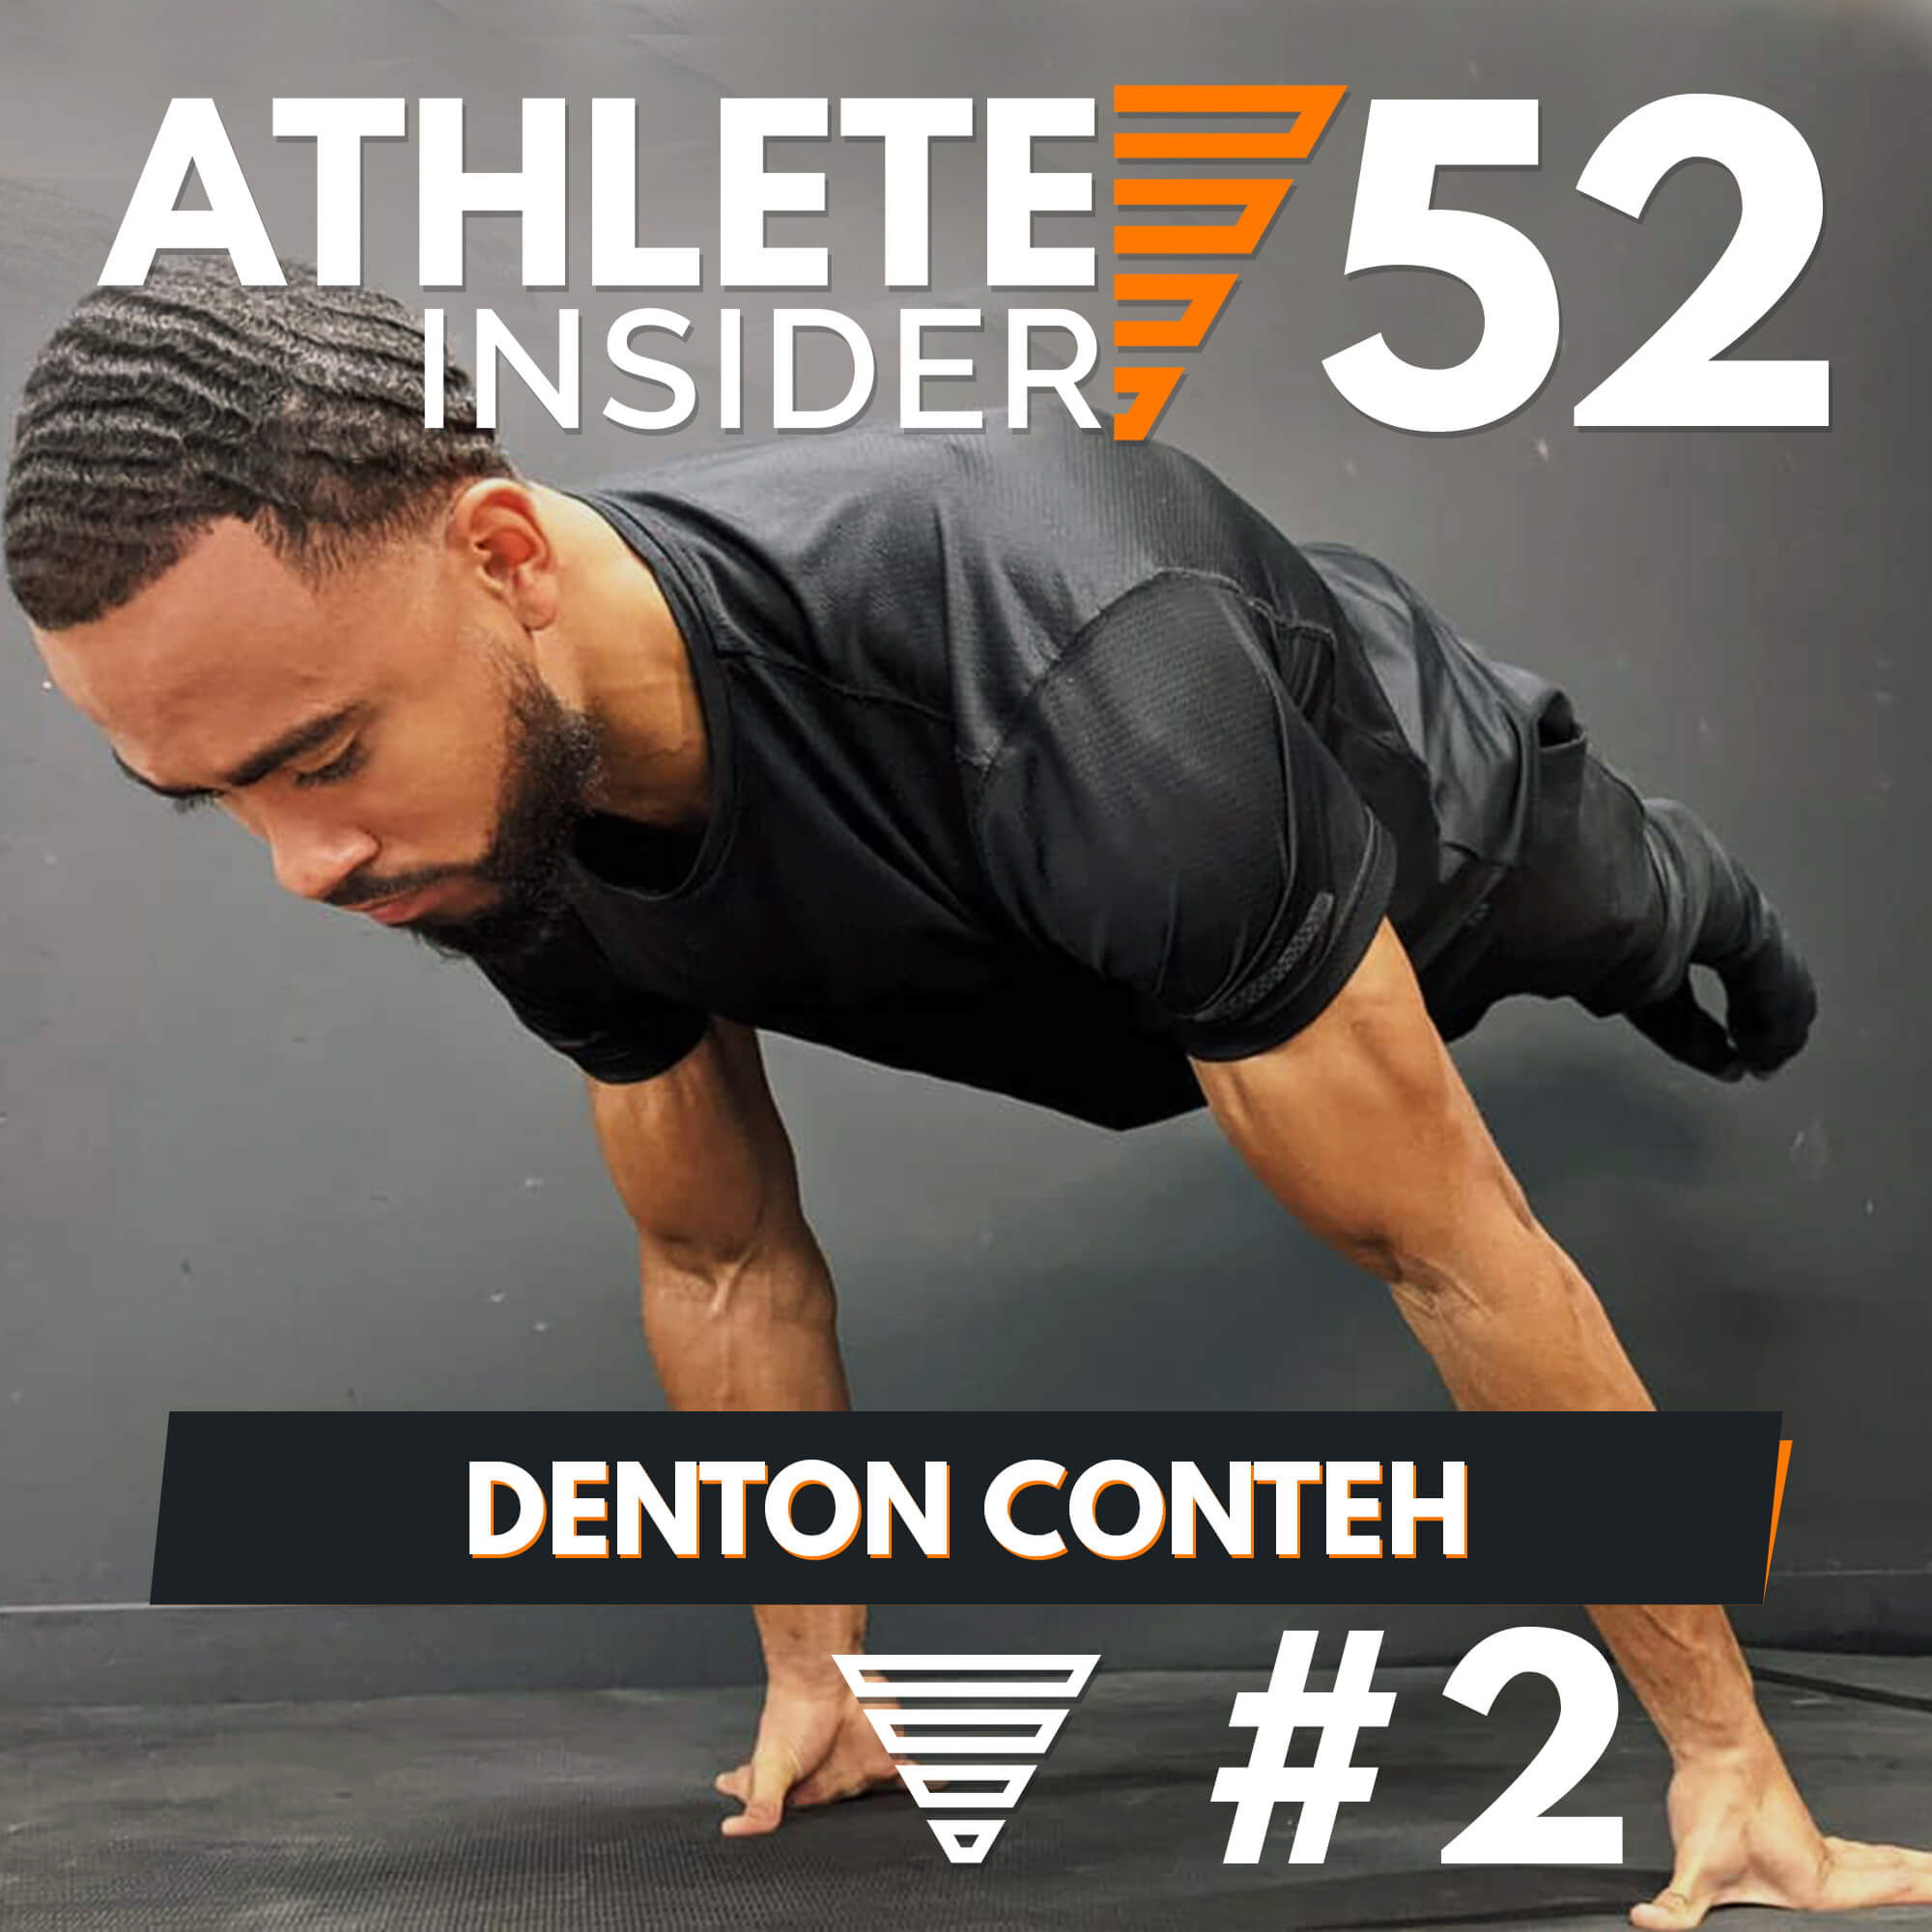 DENTON CONTEH | Why You Should Lift Heavy | Interview | The Athlete Insider Podcast #52 Pt. II